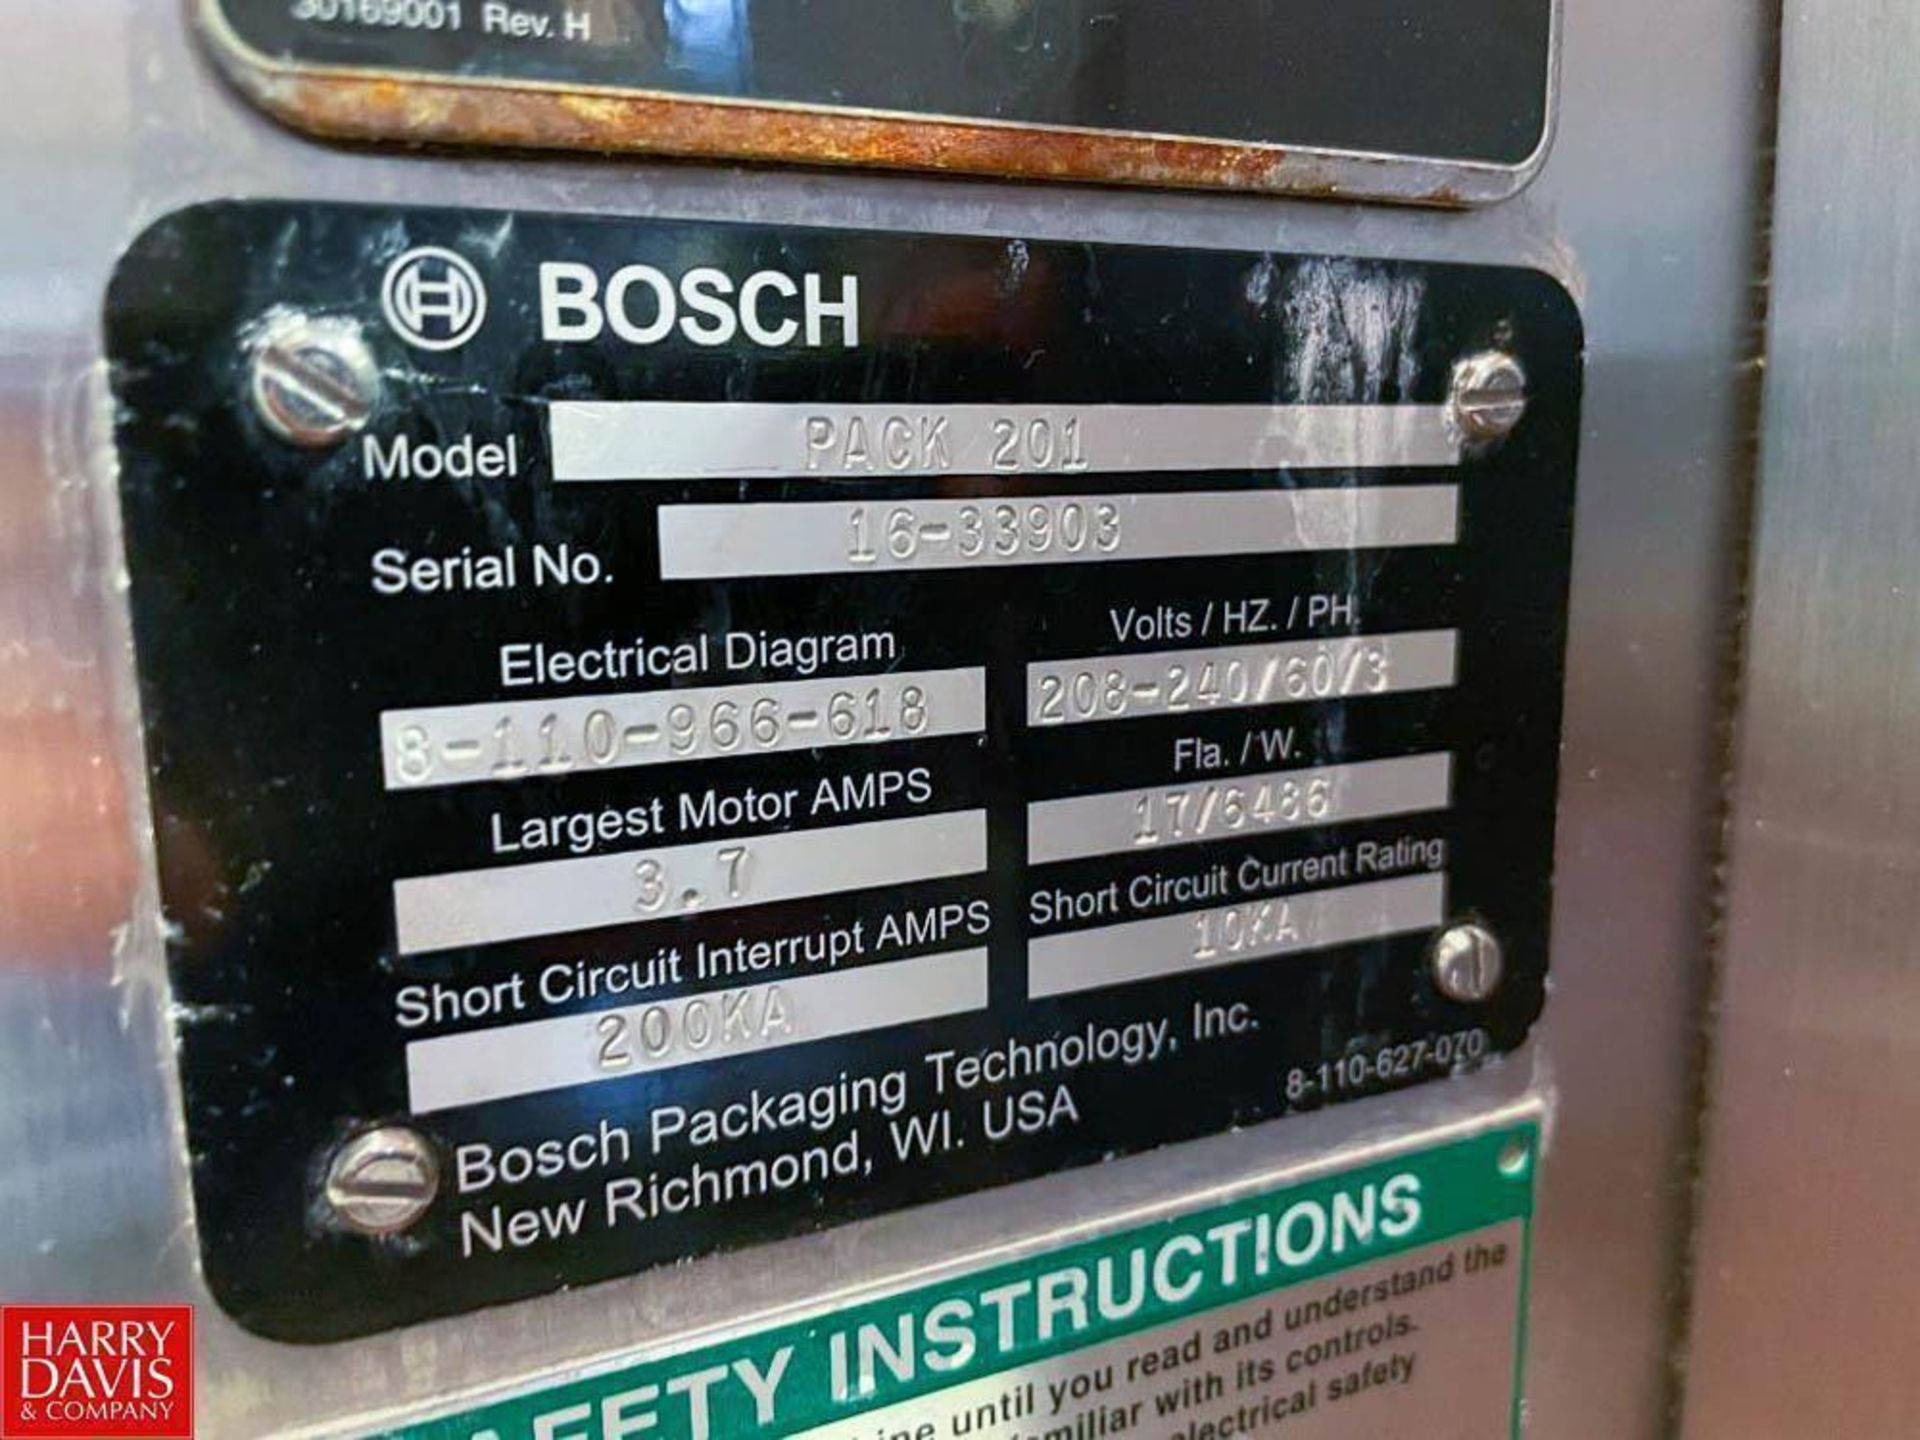 Bosch S/S Flow Wrapper, Model: PACK201, S/N: 16-33903 with Rexroth Controls and Conveyor - Image 7 of 7